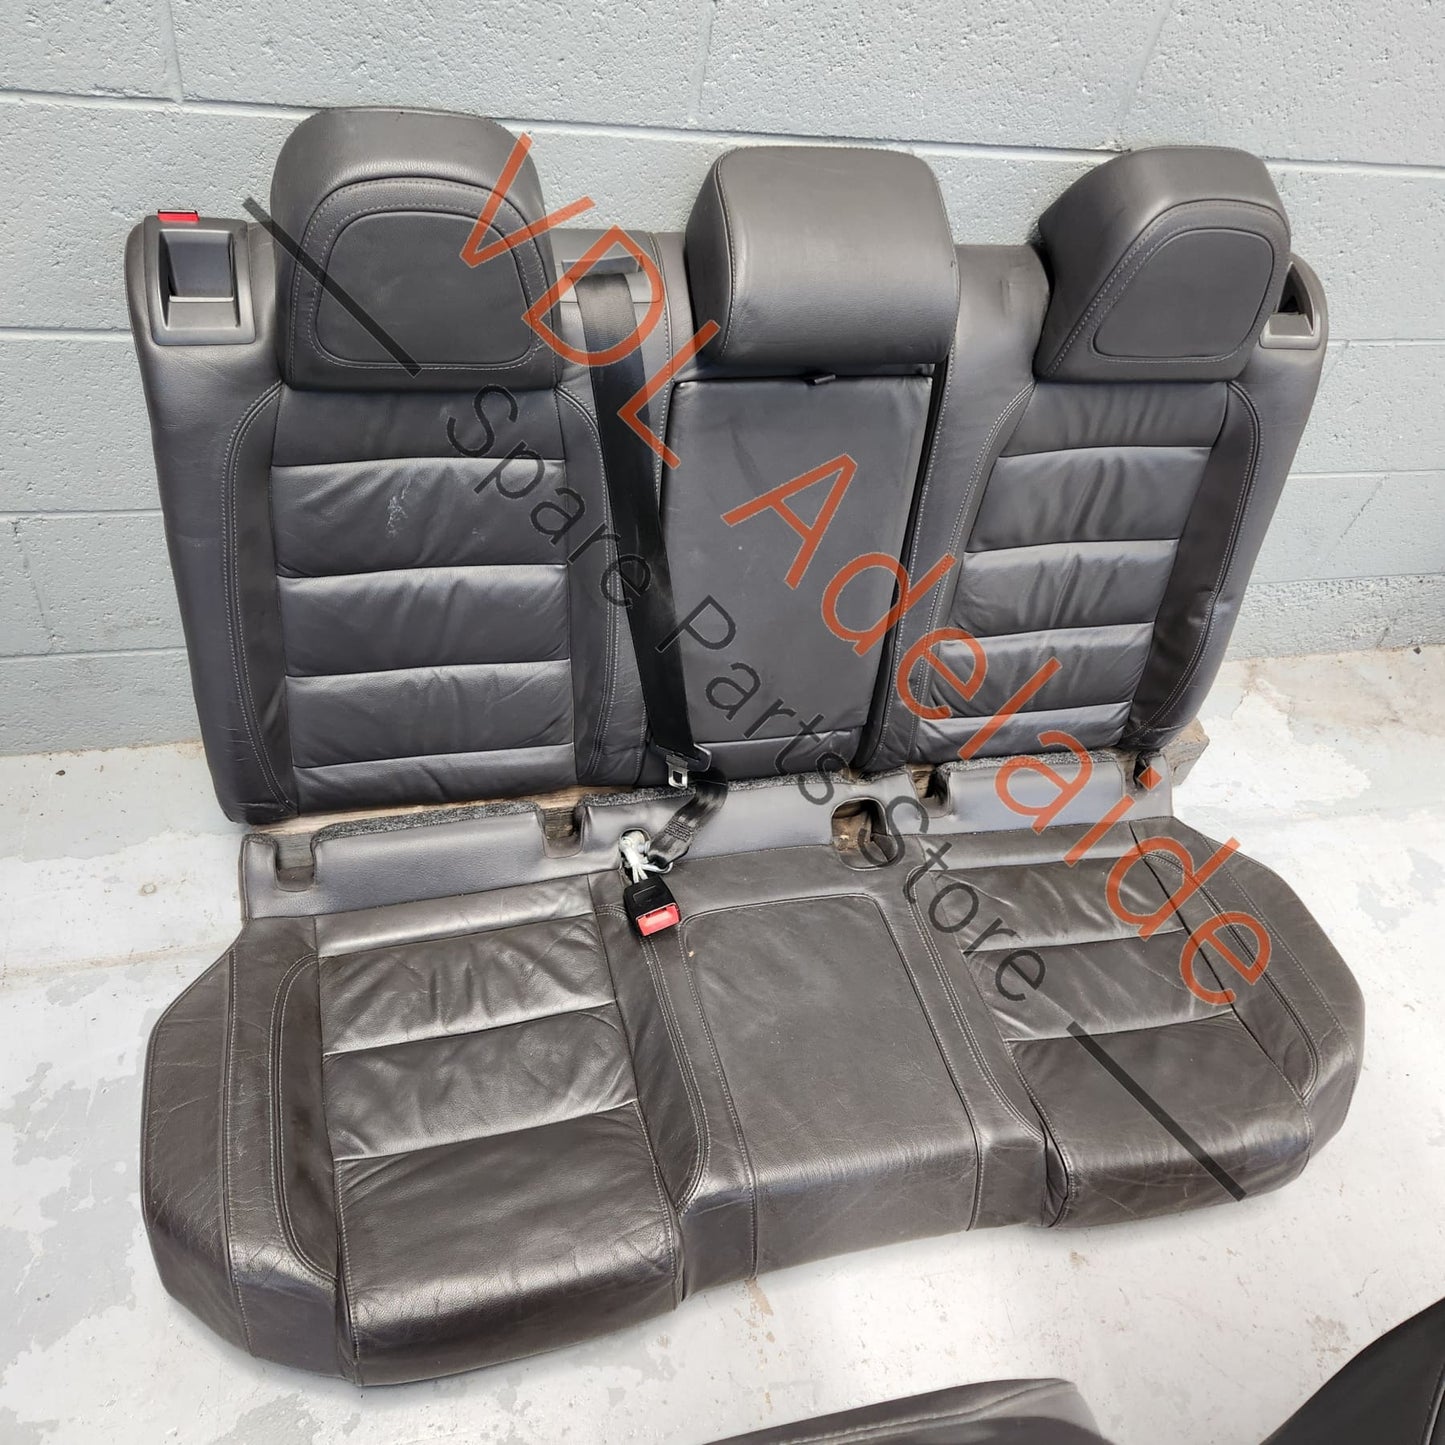     VW Golf R32 MK5 Complete set of Leather Sport Seats Interior Trim w/Heaters